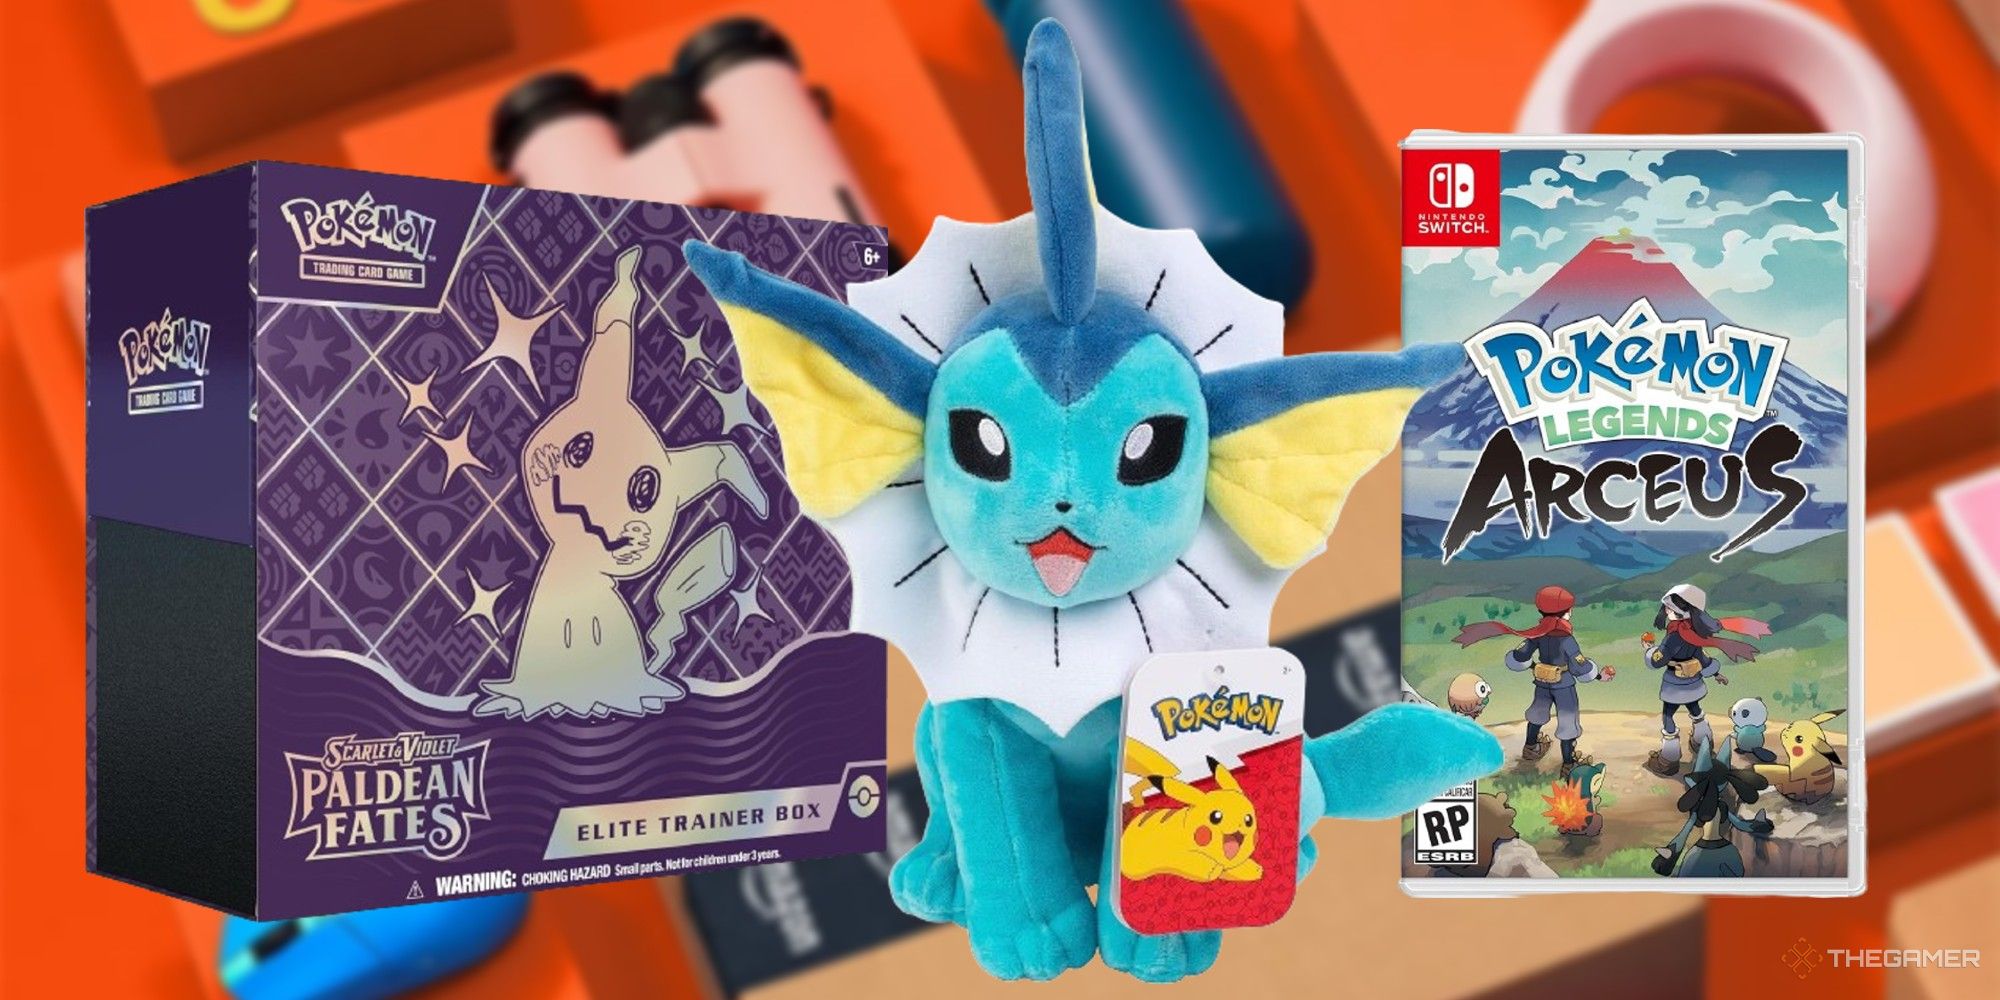 Pokémon Trainer Boxes, Booster Pack Sale for Black Friday